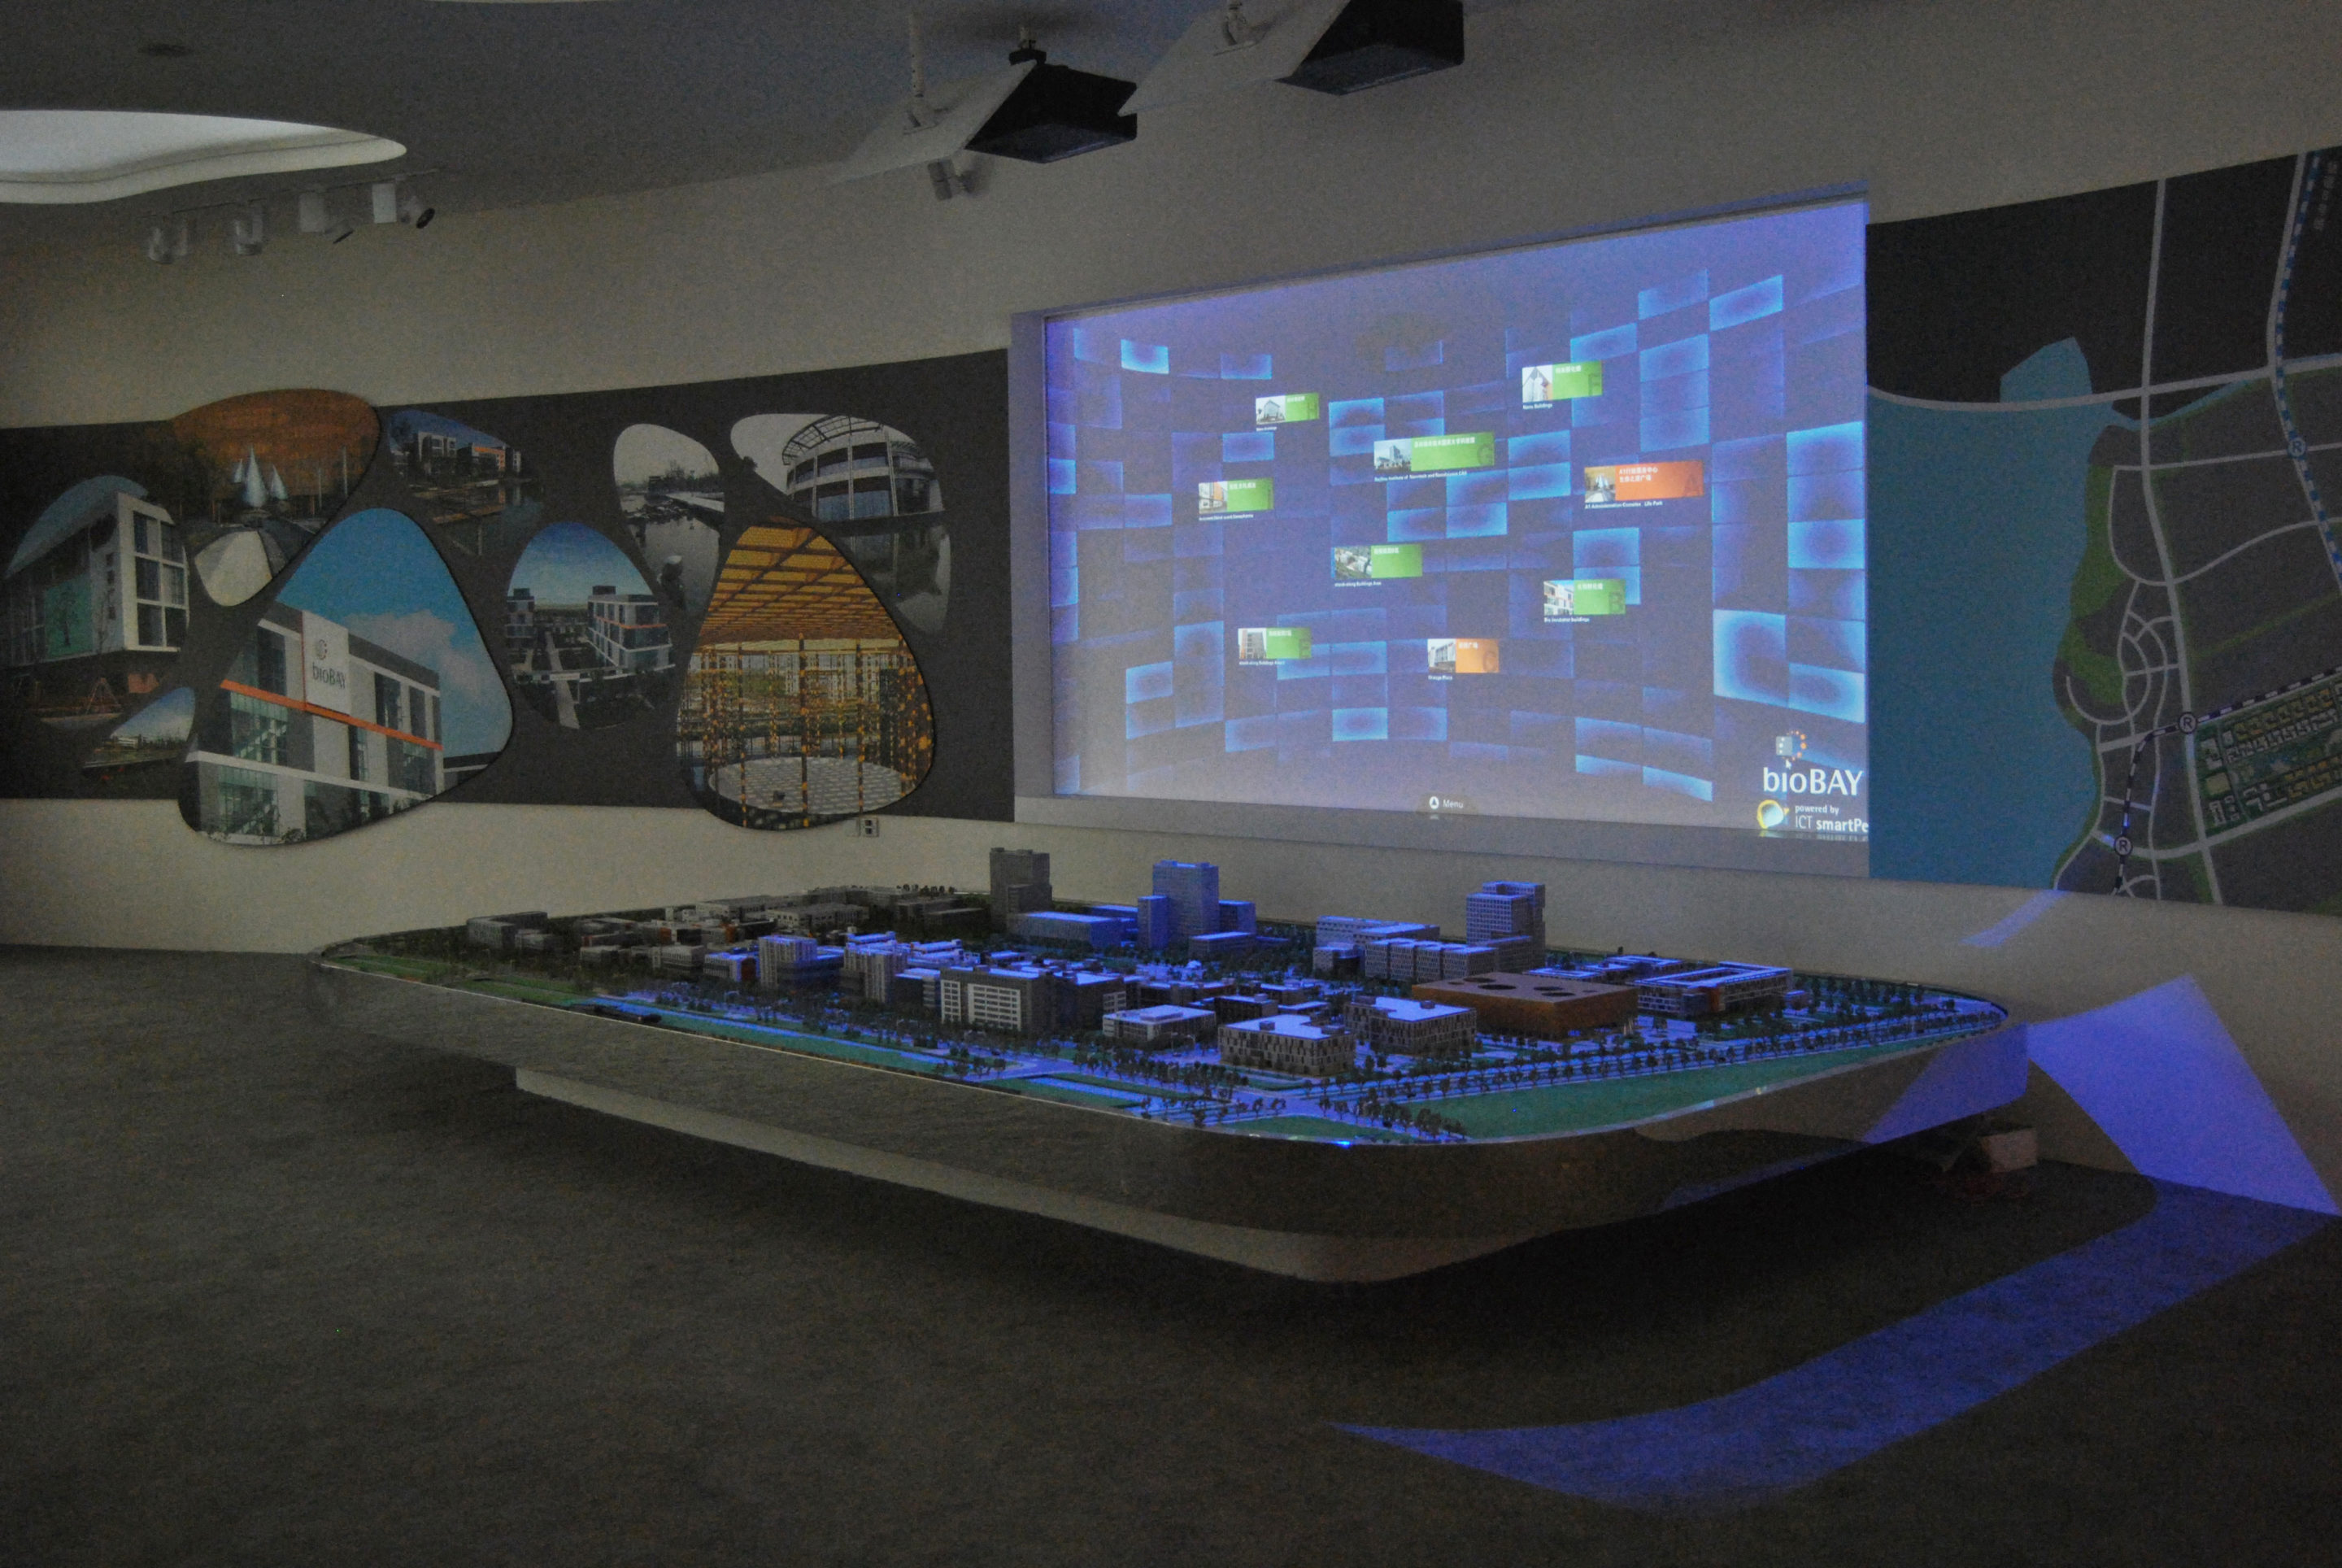 Another multimedia exhibit in the form of a scale terrain model serves visitors for interactive orientation on the grounds of the Suzhou Industrial Park. Using iPad control, individual buildings can be selected on a digital terrain plan and illuminated on the model. smartPerform visualizes the corresponding information to choose from on a projection surface positioned behind the model, which is played using suspended projectors.